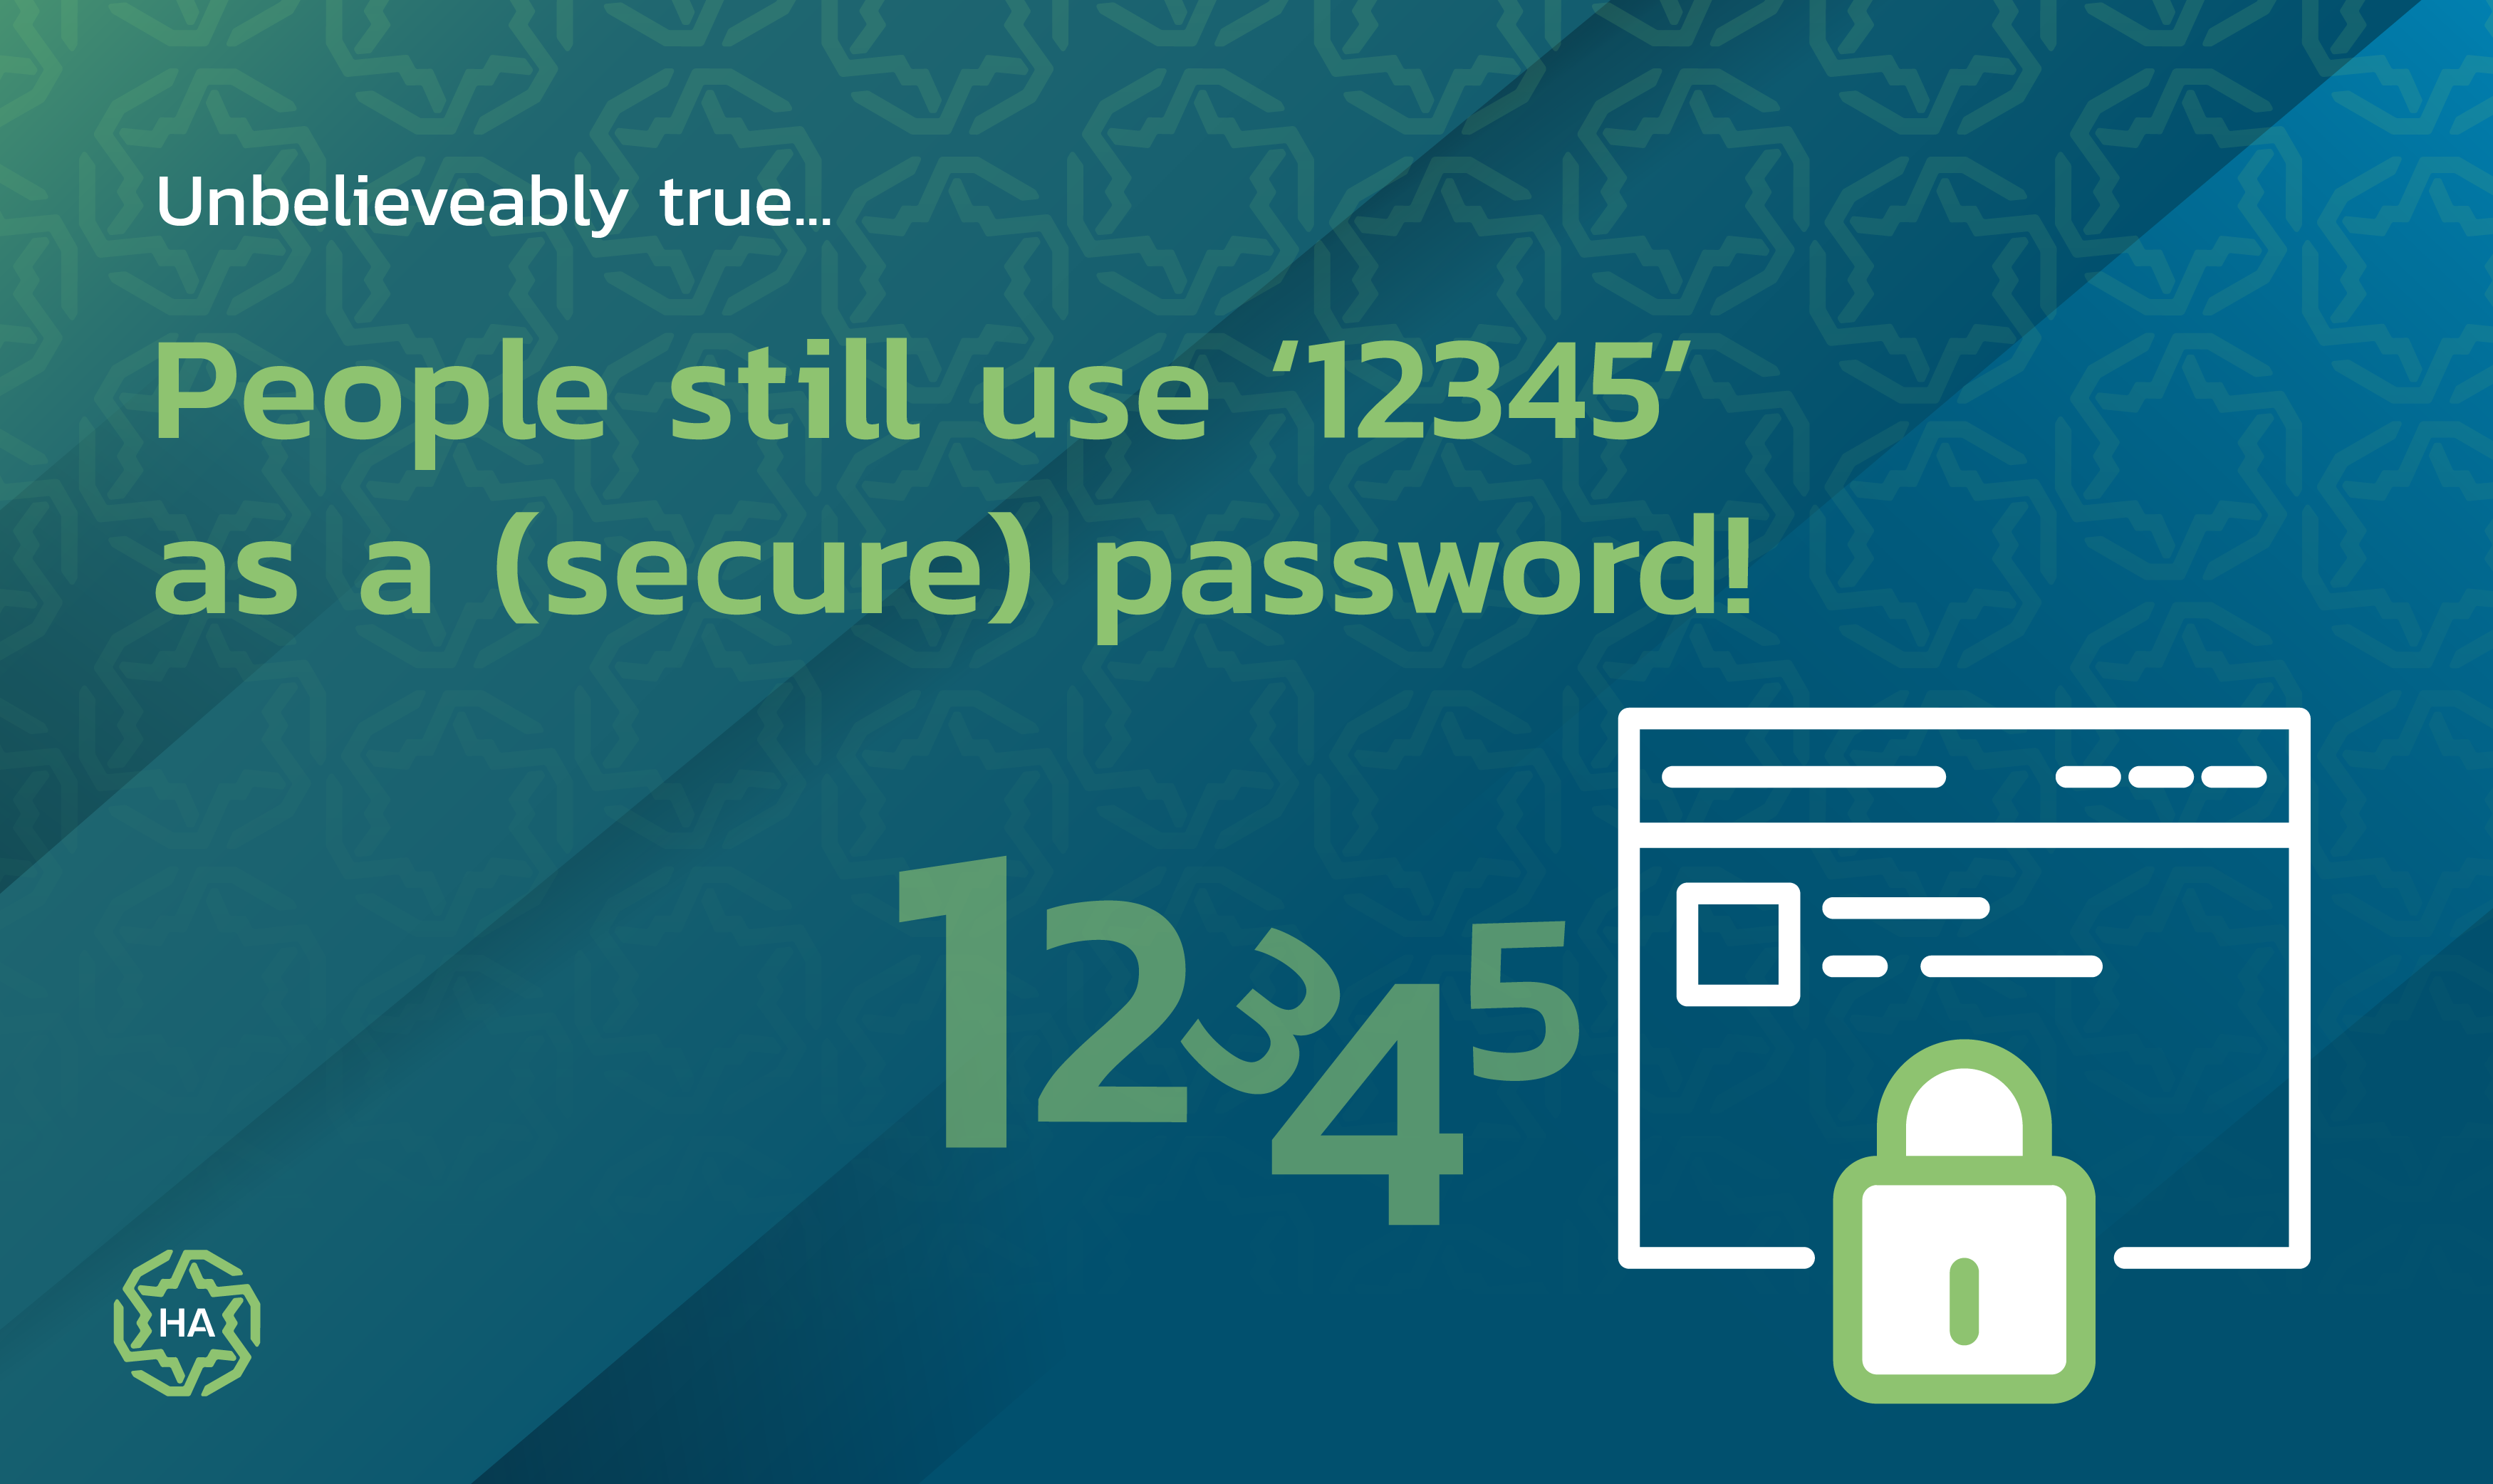 Using 12345 as a secure password is not a good idea